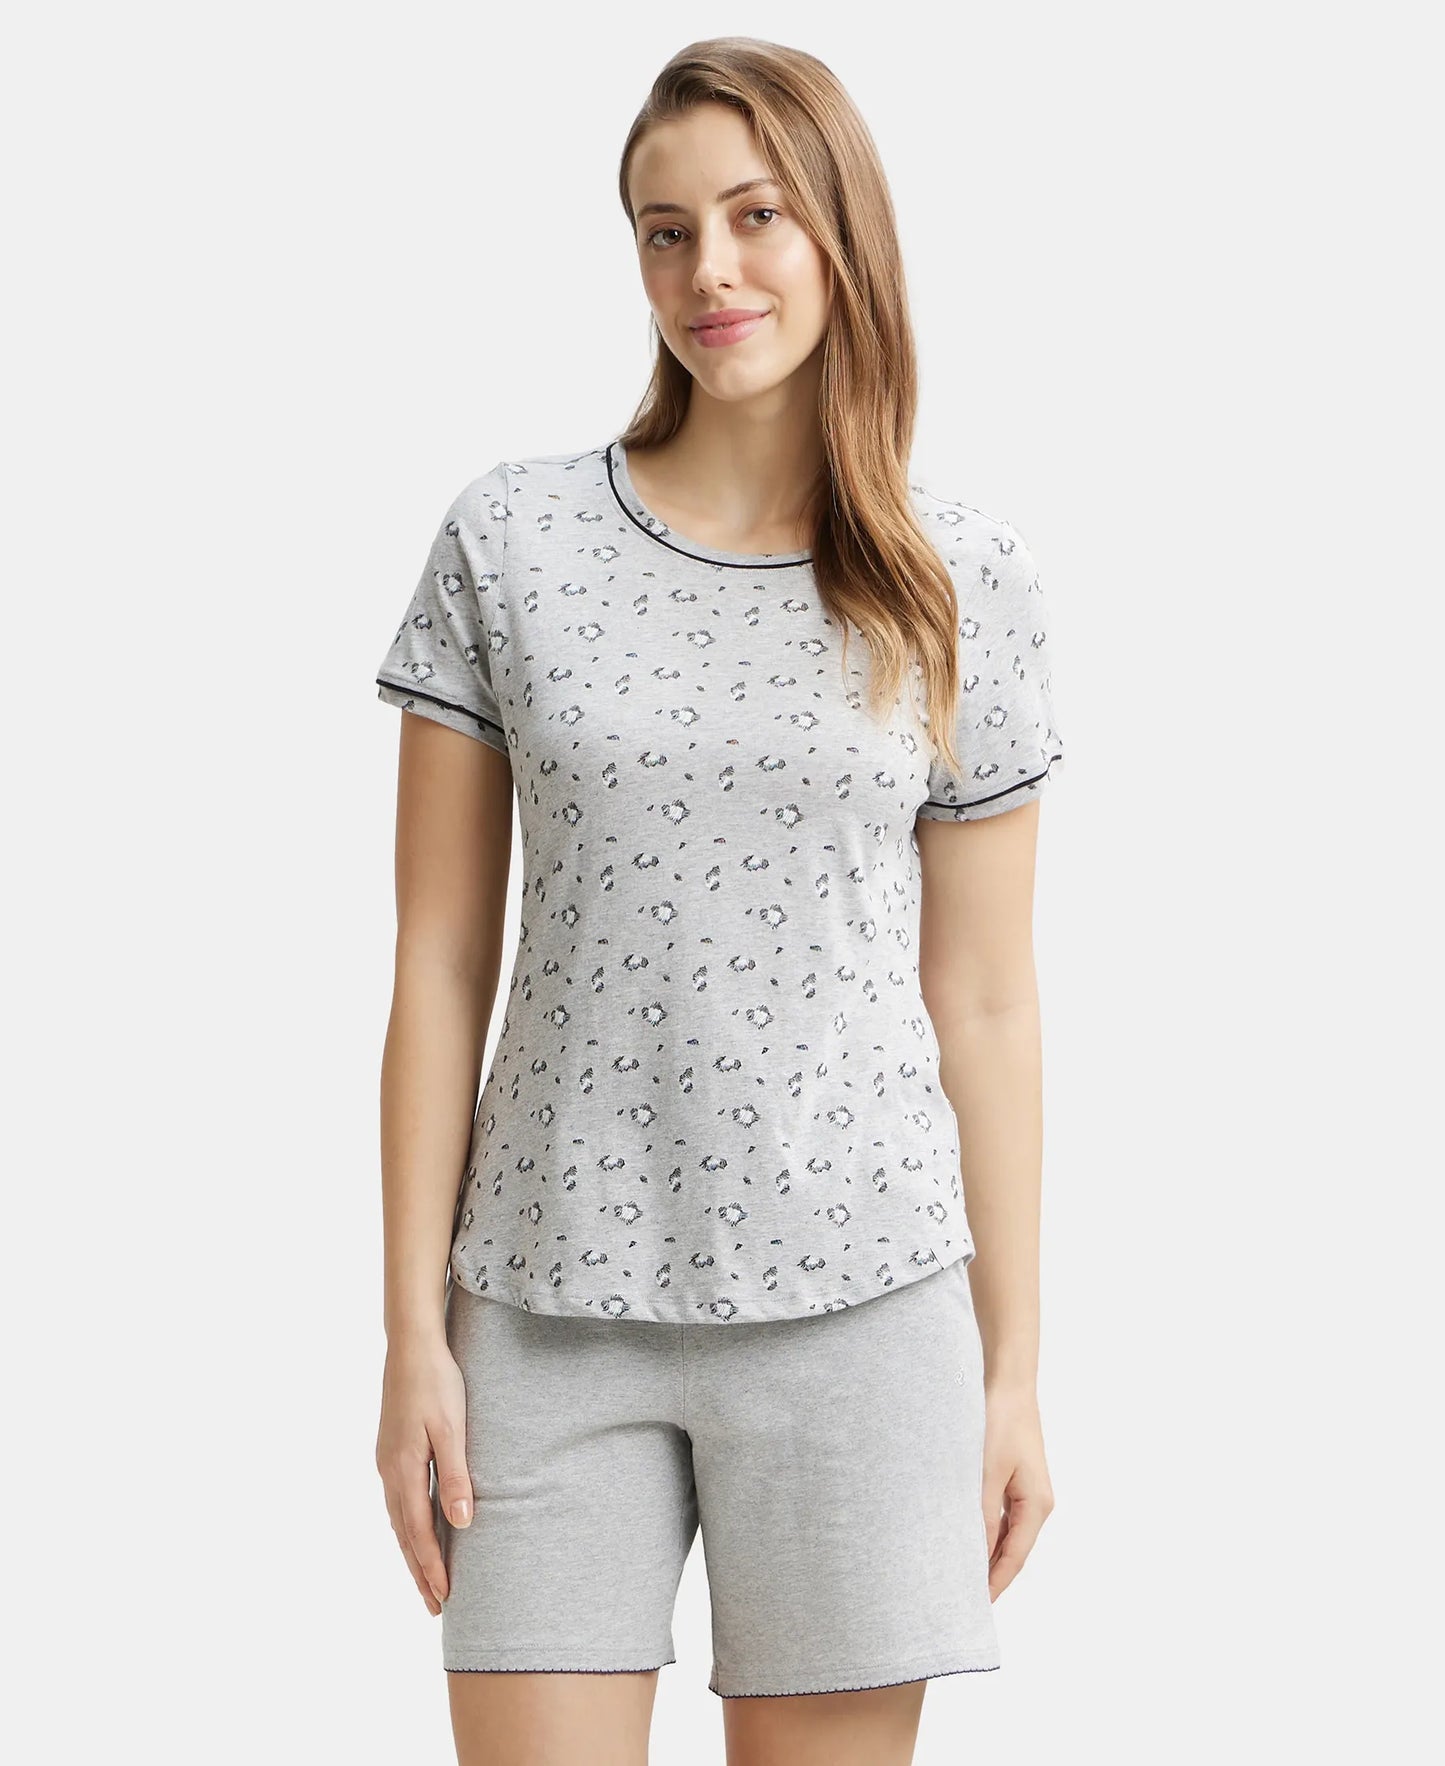 Super Combed Cotton Relaxed Fit Printed Round Neck Half Sleeve T-Shirt with Contrast Piping Design - Light Grey Melange-5